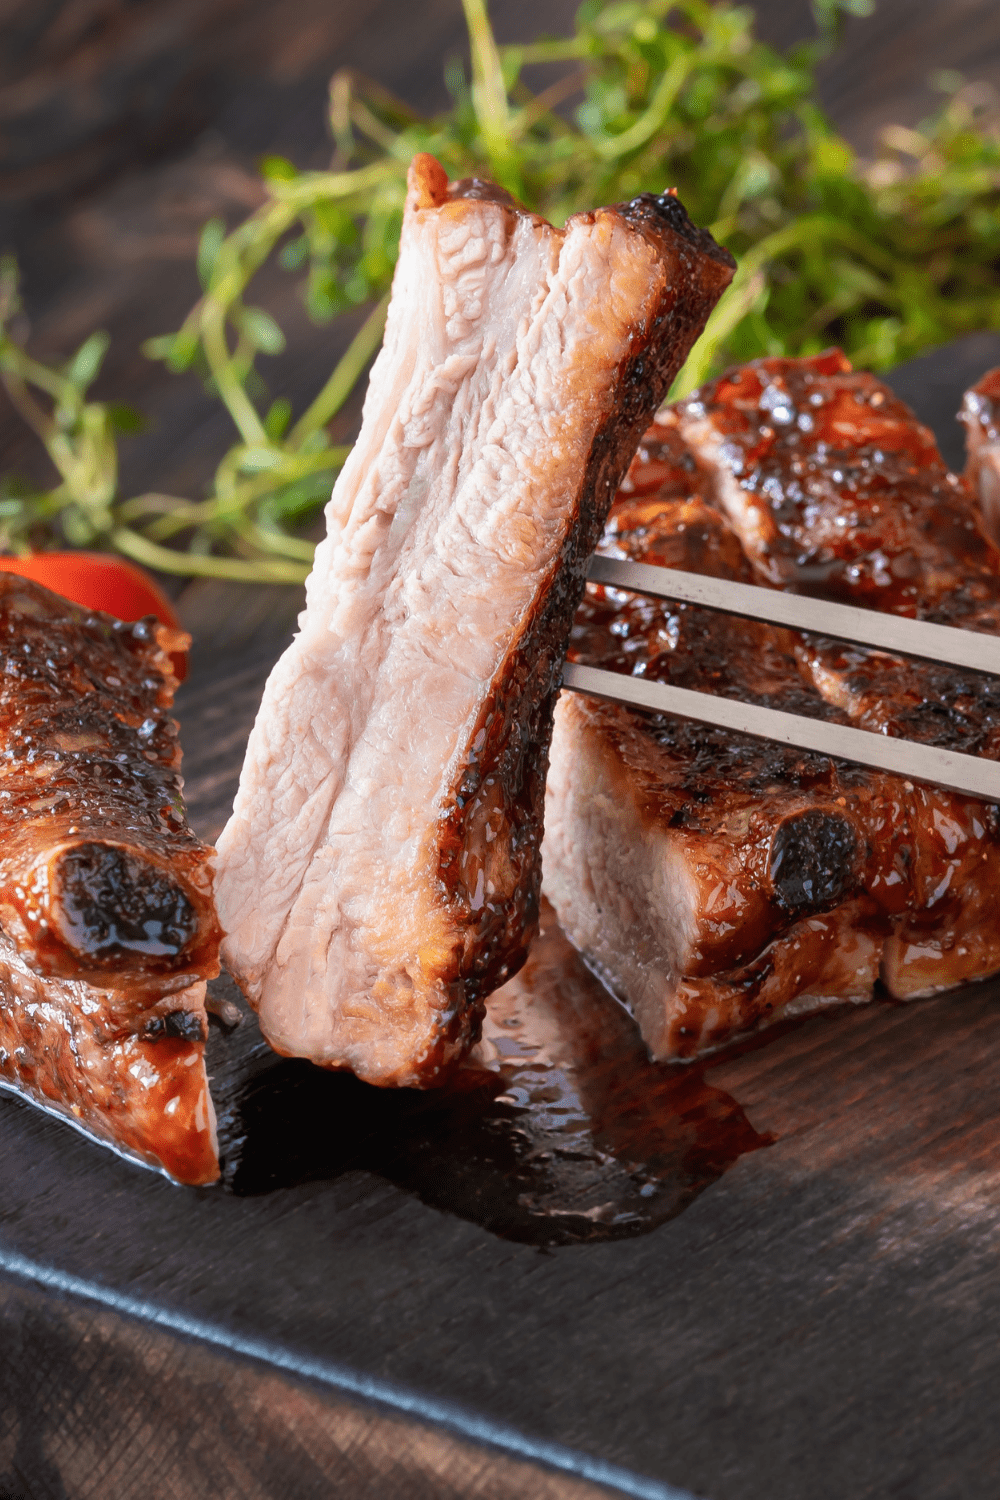 Easy Air Fryer Ribs featuring Air Fryer BBQ Pork Ribs Cut Into Slices on a Cutting Board, One Piece Picked Up with a Large Meat Fork